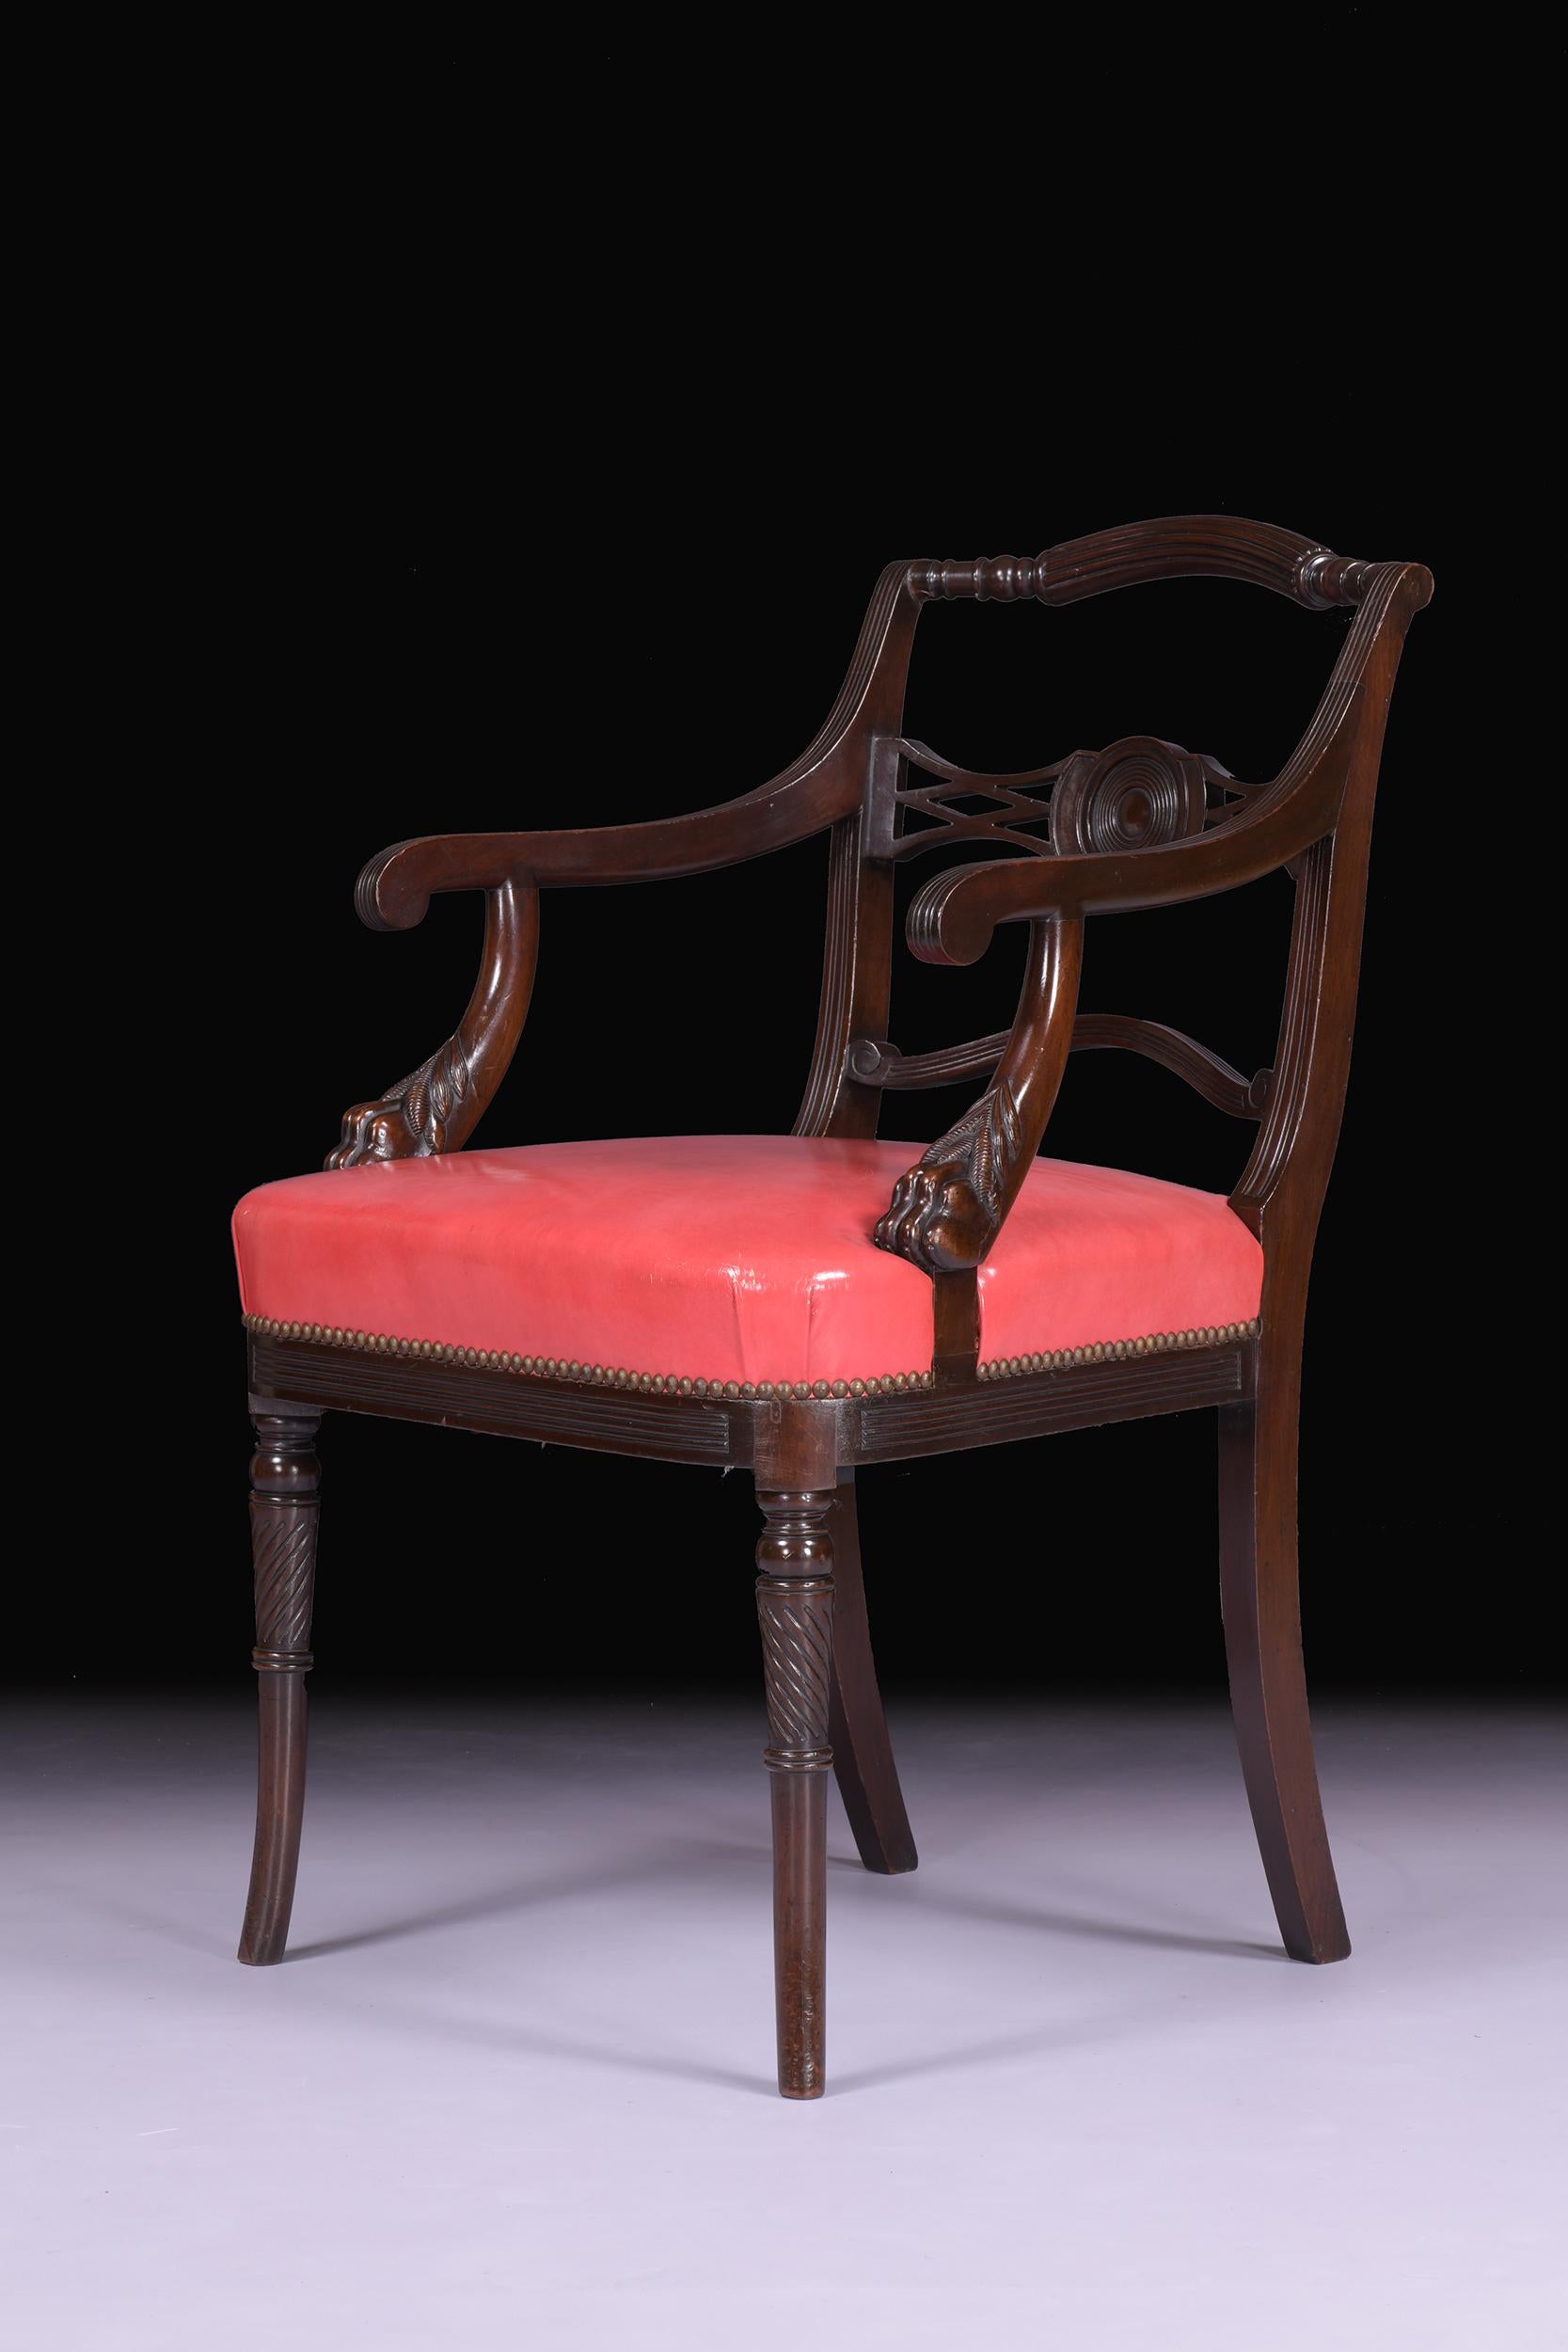 Pair of Early 19th Century Irish Regency Armchairs by Mack Williams & Gibton For Sale 1